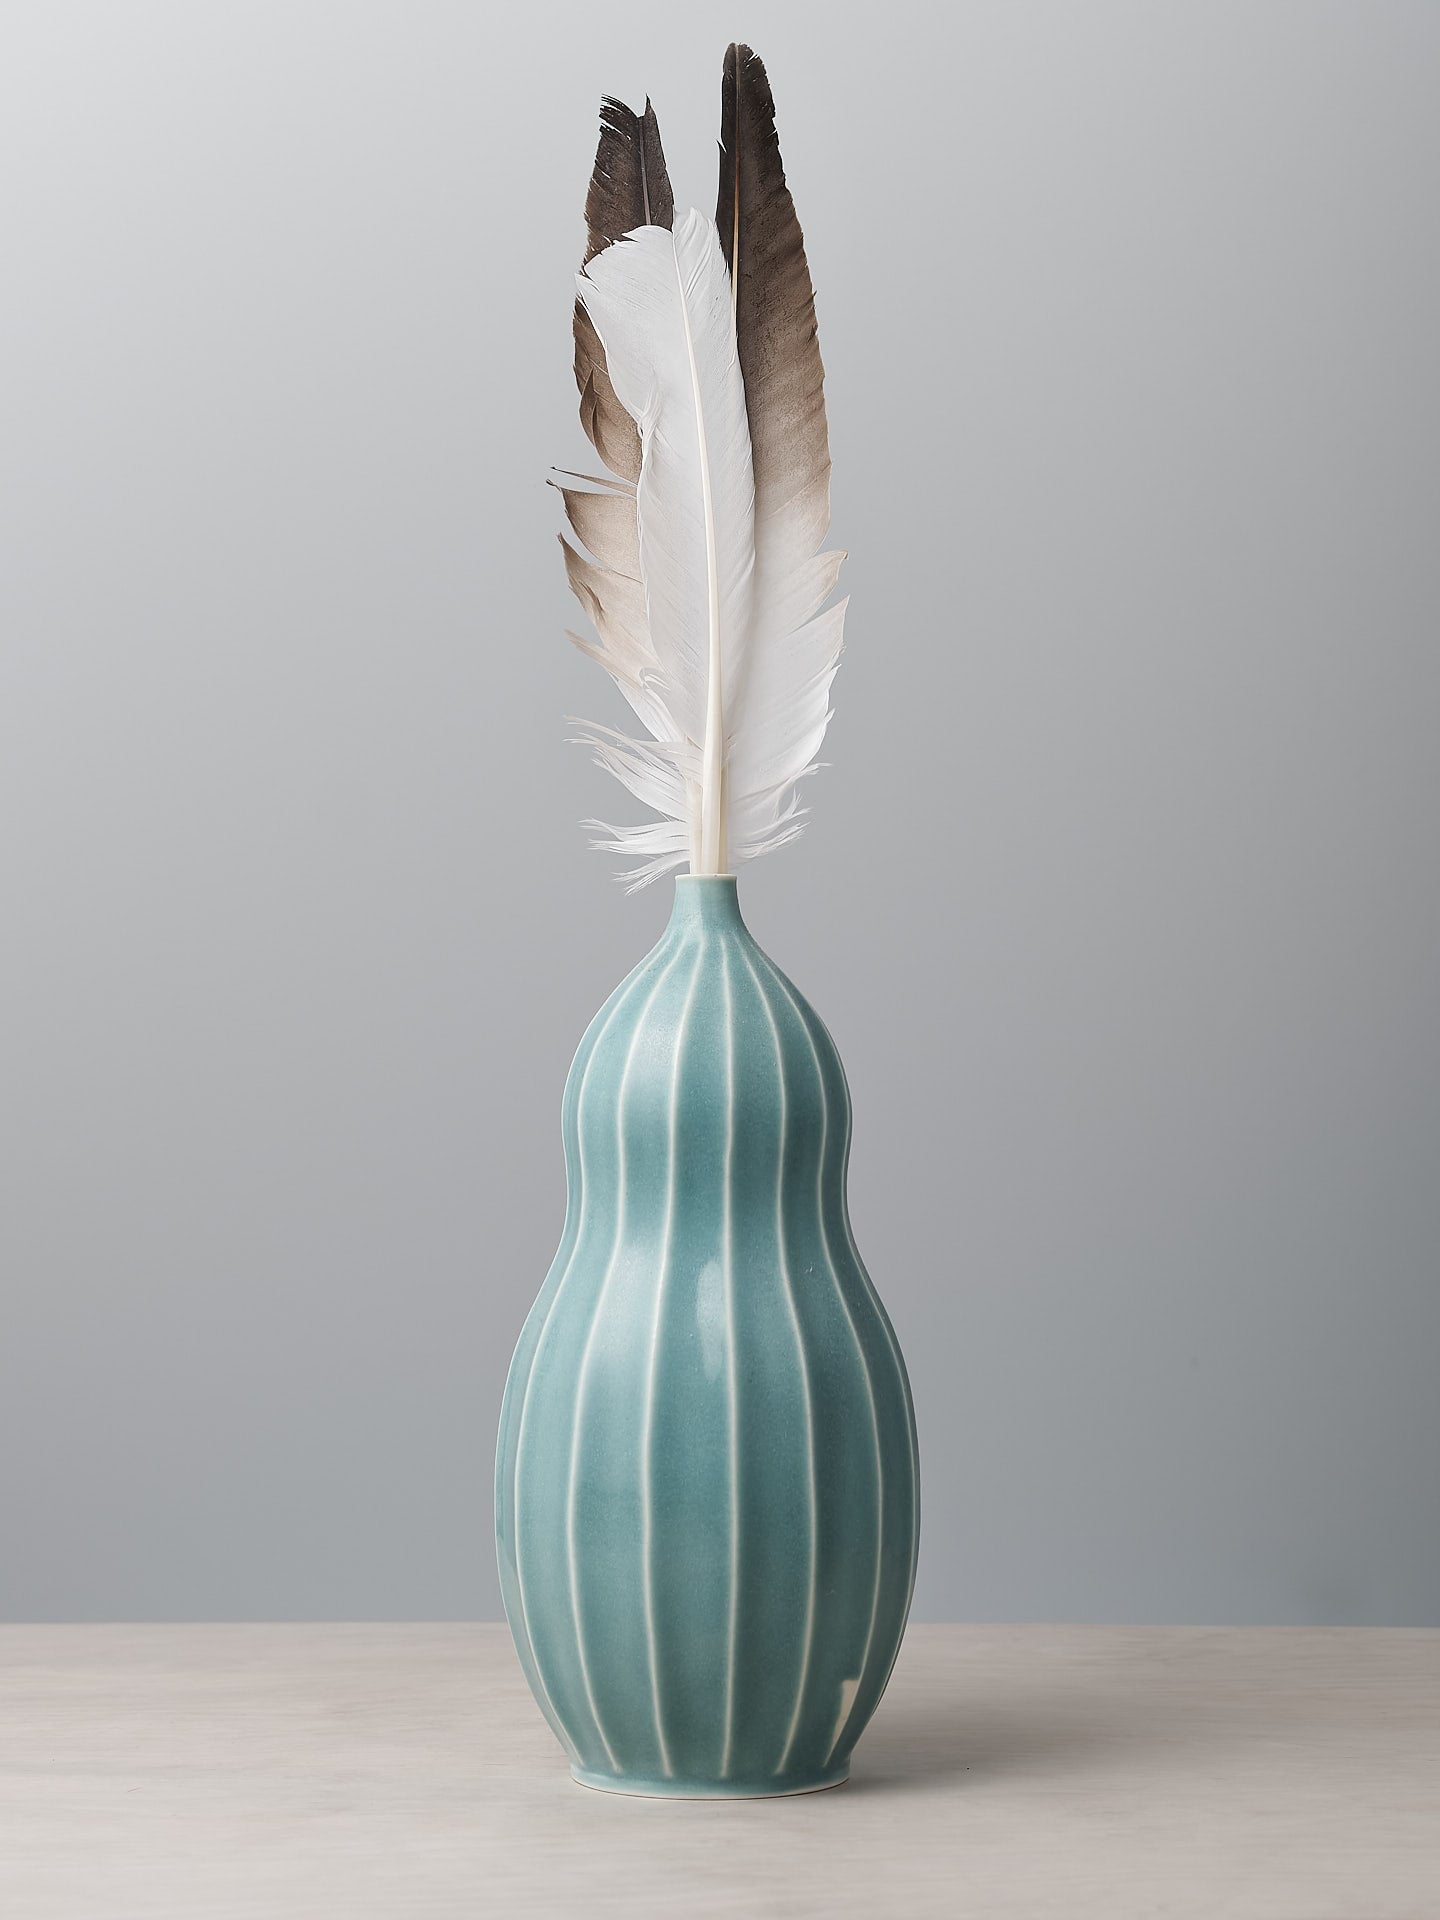 A Gourd Vase - Celadon from Jino Ceramic Studio with a feather in it.